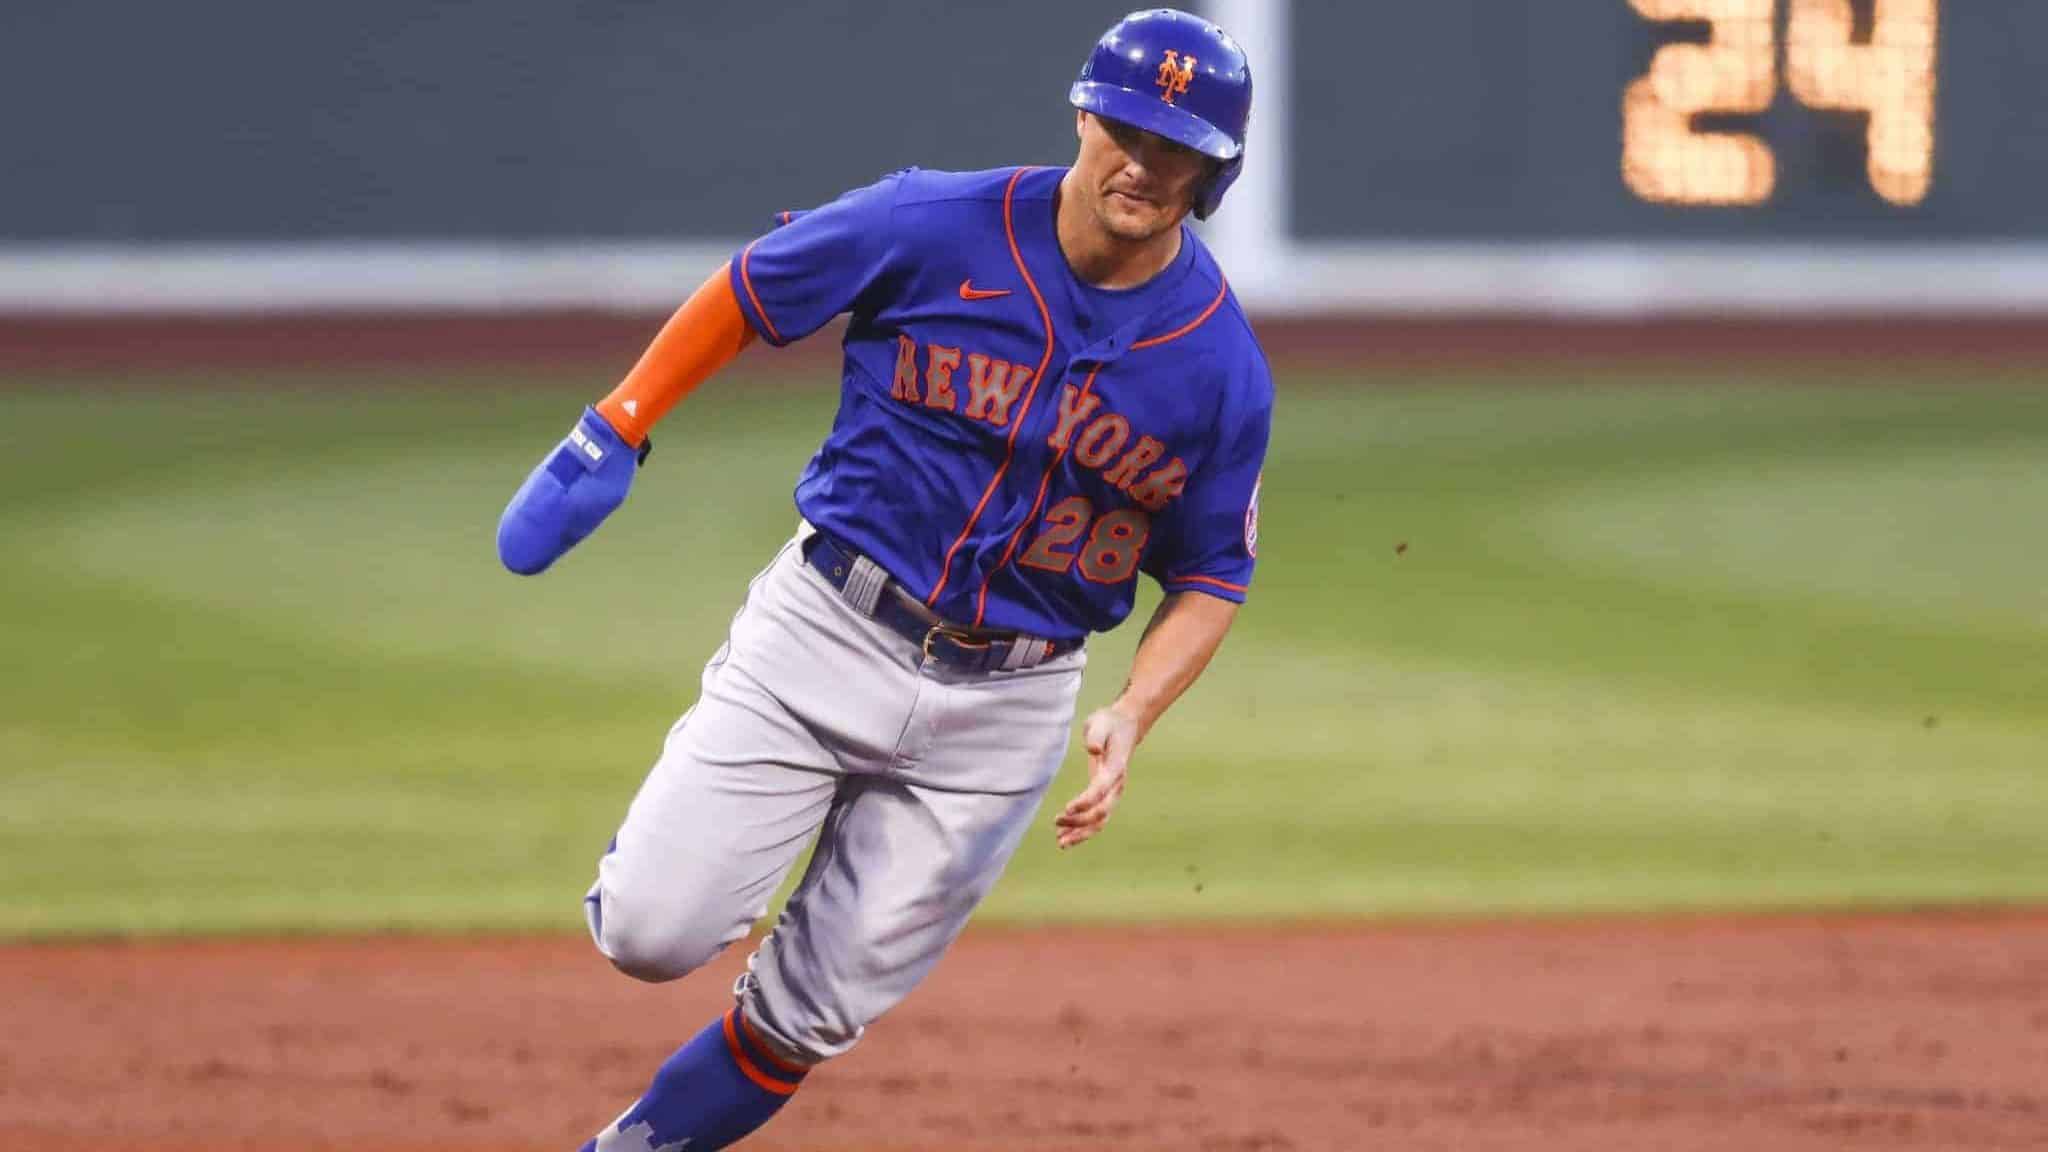 BOSTON, MA - JULY 28: J.D. Davis #28 of the New York Mets rounds third base on his way to scoring in the second inning against the Boston Red Sox at Fenway Park on July 28, 2020 in Boston, Massachusetts.